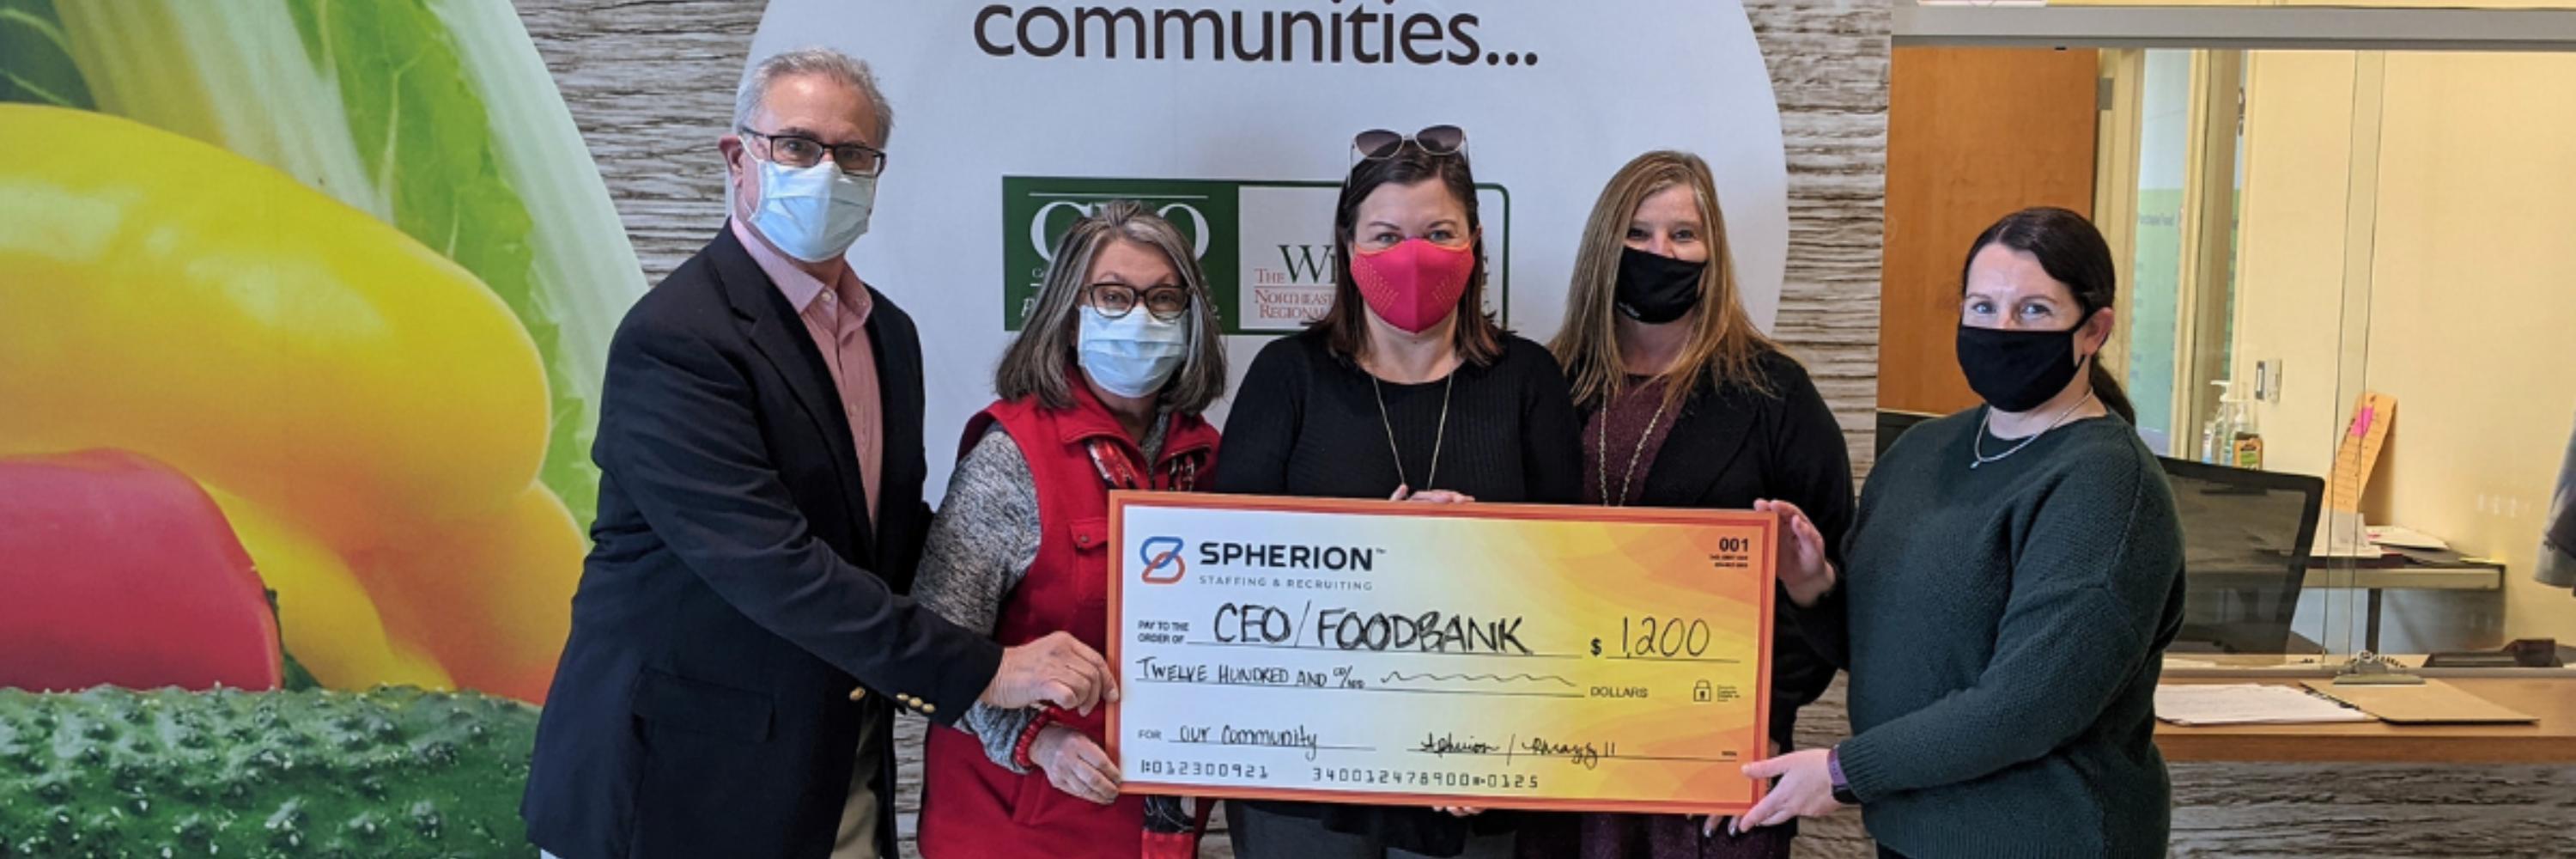 The Spherion Pennsylvania team presenting a giant check to a community food bank